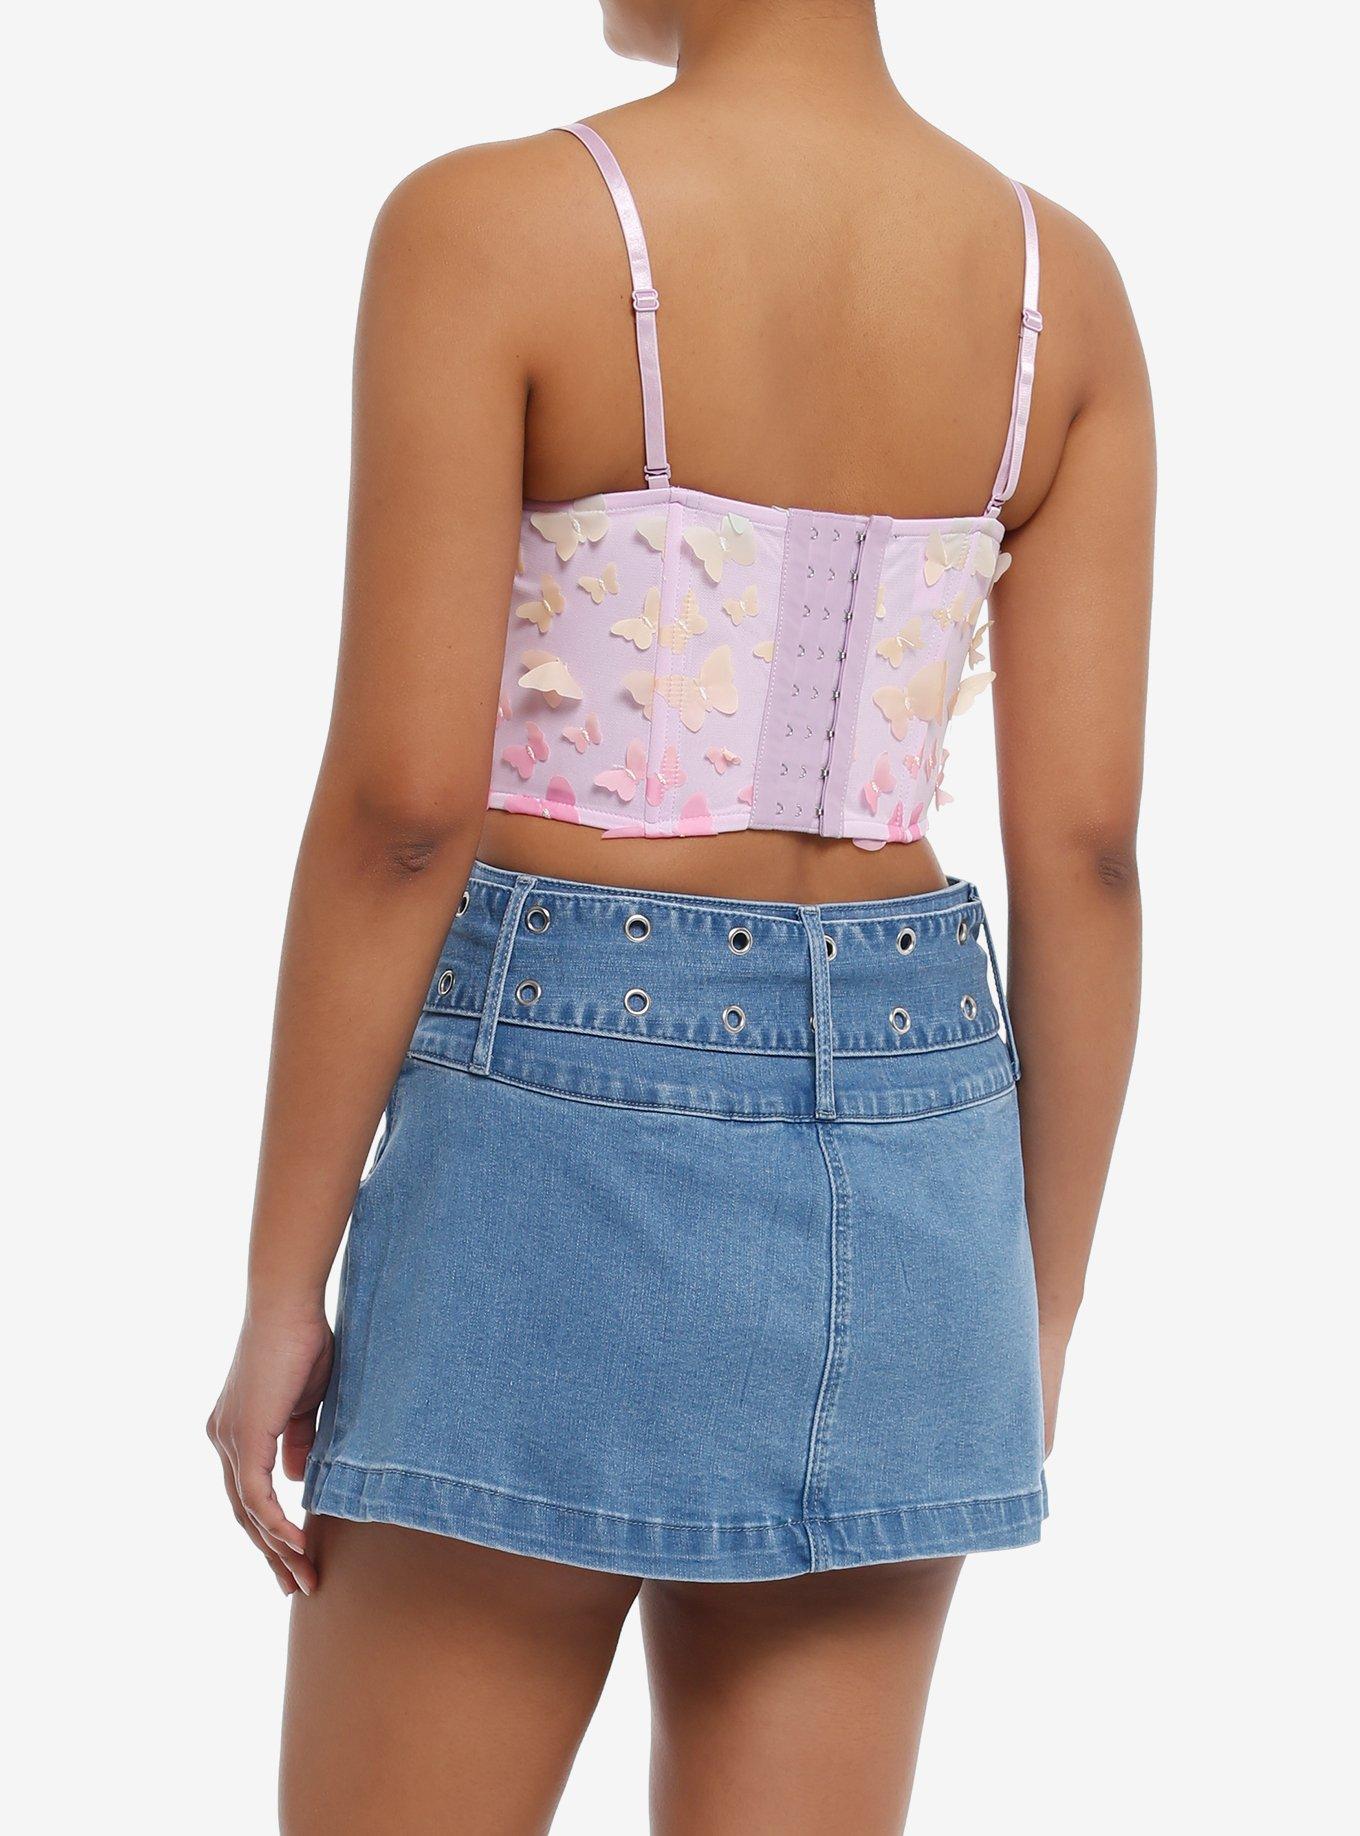 Thorn & Fable® Rainbow Butterfly Pastel Lace-Up Girls Corset Top